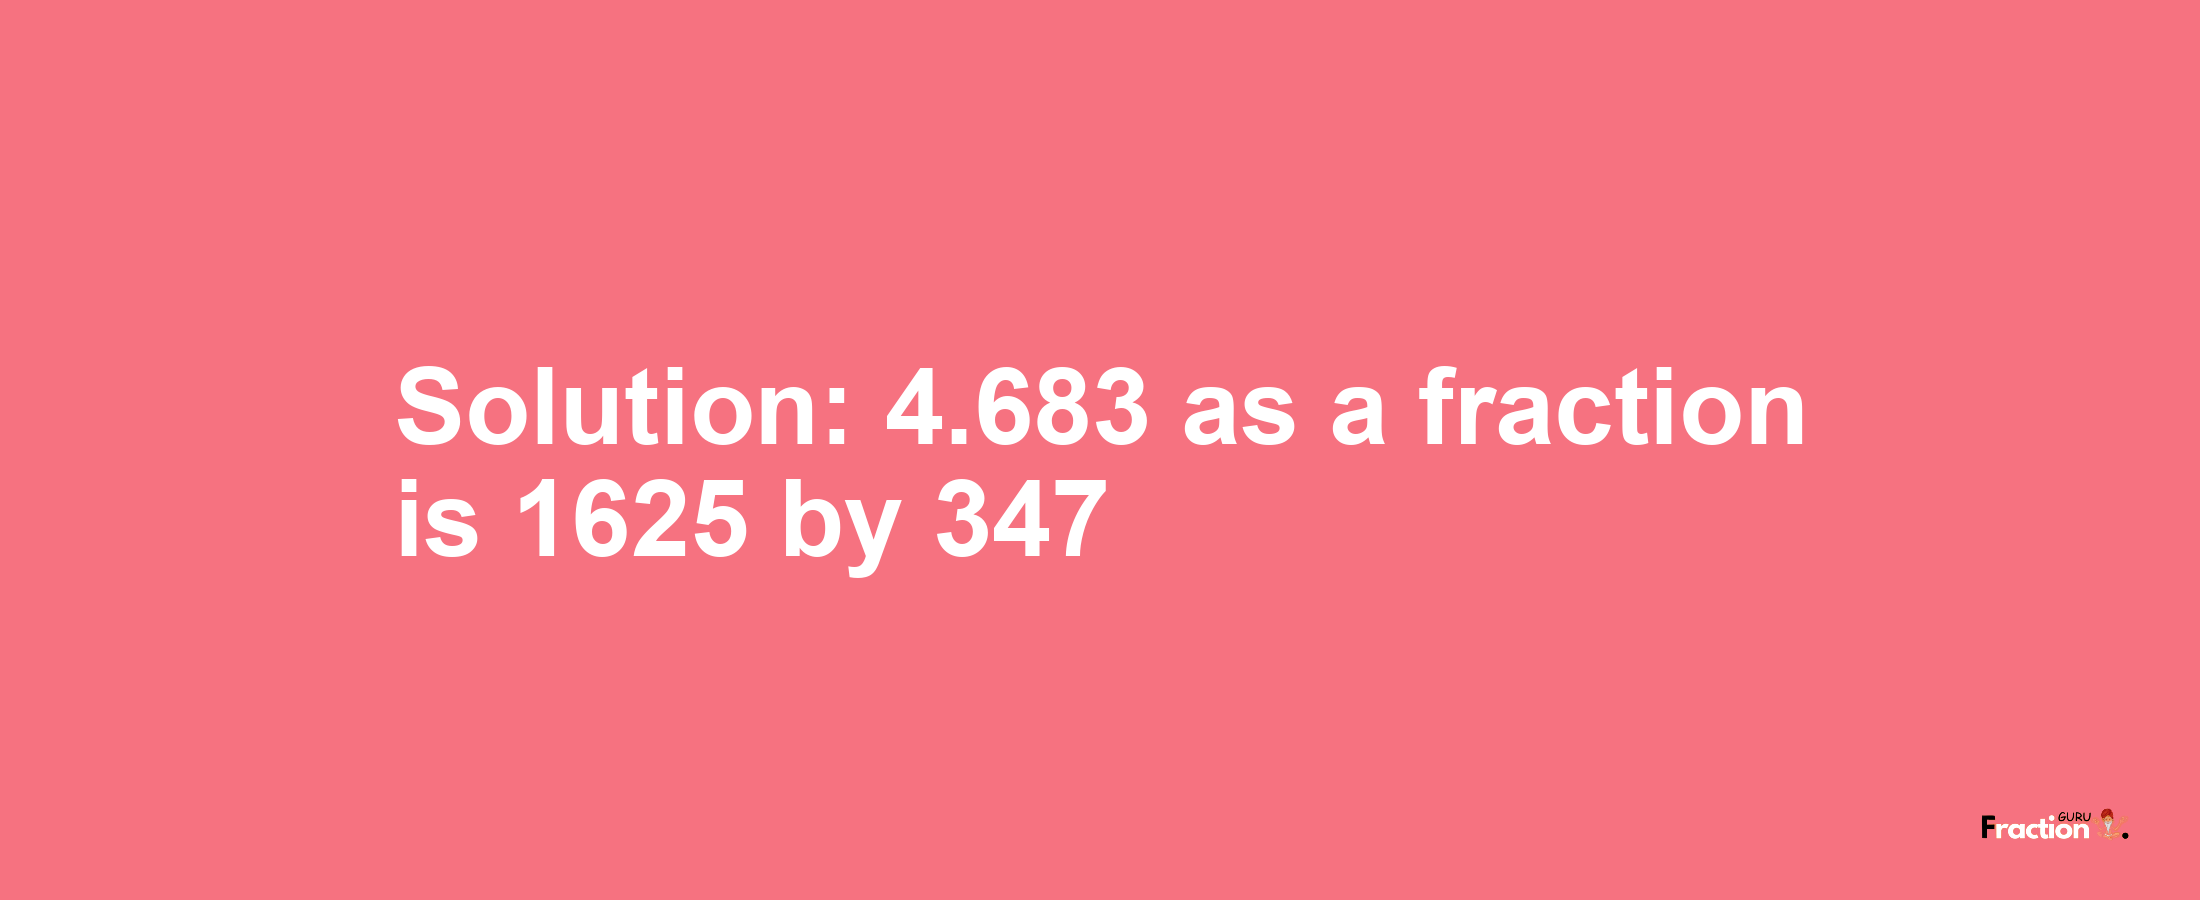 Solution:4.683 as a fraction is 1625/347